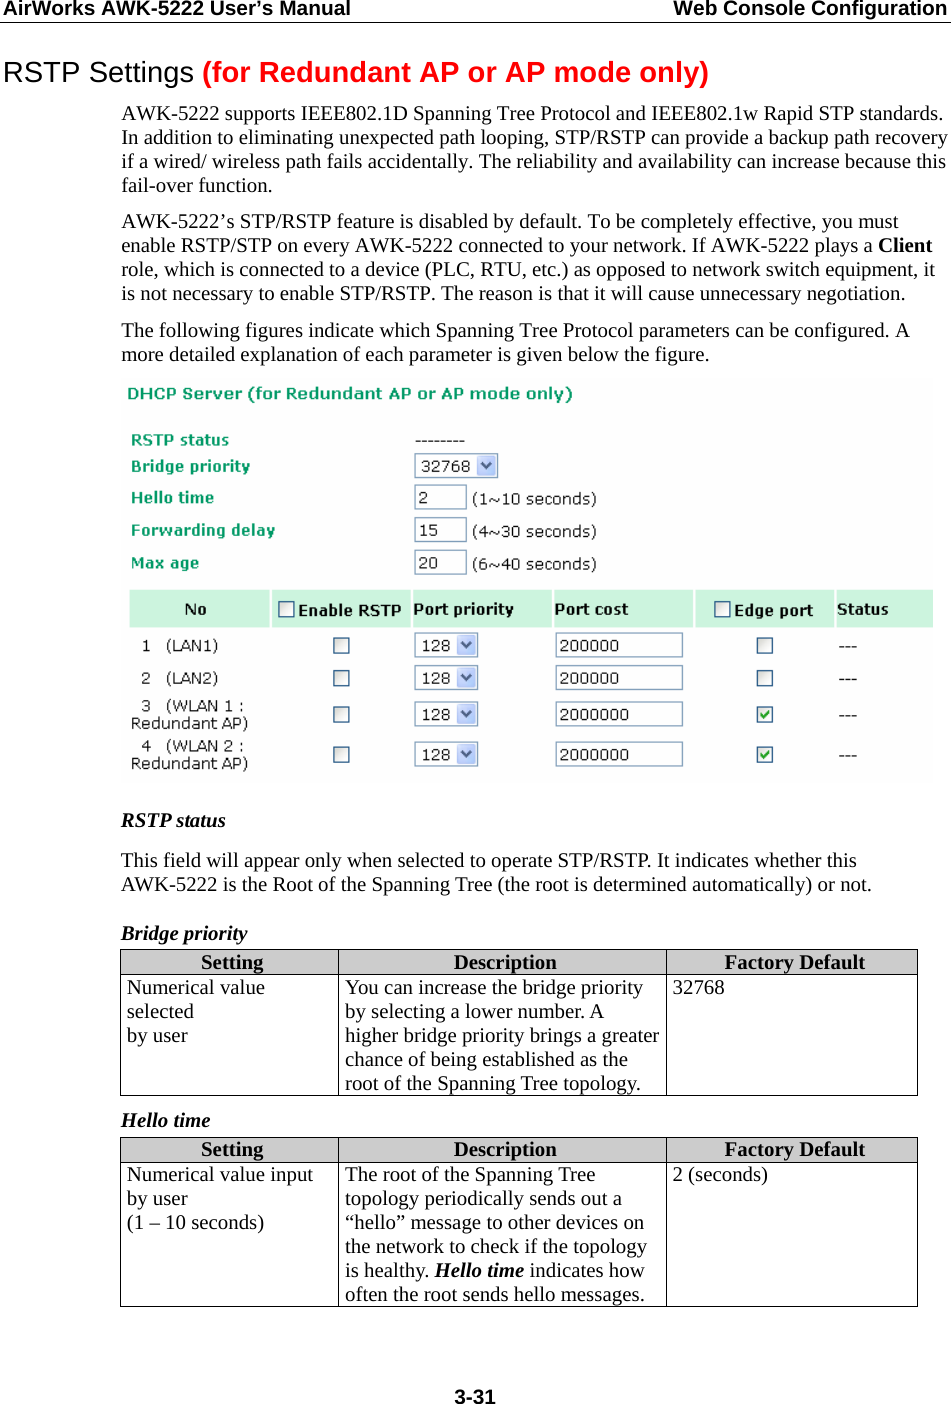 AirWorks AWK-5222 User’s Manual  Web Console Configuration  3-31RSTP Settings (for Redundant AP or AP mode only) AWK-5222 supports IEEE802.1D Spanning Tree Protocol and IEEE802.1w Rapid STP standards. In addition to eliminating unexpected path looping, STP/RSTP can provide a backup path recovery if a wired/ wireless path fails accidentally. The reliability and availability can increase because this fail-over function. AWK-5222’s STP/RSTP feature is disabled by default. To be completely effective, you must enable RSTP/STP on every AWK-5222 connected to your network. If AWK-5222 plays a Client role, which is connected to a device (PLC, RTU, etc.) as opposed to network switch equipment, it is not necessary to enable STP/RSTP. The reason is that it will cause unnecessary negotiation.   The following figures indicate which Spanning Tree Protocol parameters can be configured. A more detailed explanation of each parameter is given below the figure.  RSTP status This field will appear only when selected to operate STP/RSTP. It indicates whether this AWK-5222 is the Root of the Spanning Tree (the root is determined automatically) or not. Bridge priority Setting  Description  Factory Default Numerical value selected by user You can increase the bridge priority by selecting a lower number. A higher bridge priority brings a greater chance of being established as the root of the Spanning Tree topology. 32768 Hello time Setting  Description  Factory Default Numerical value input by user (1 – 10 seconds) The root of the Spanning Tree topology periodically sends out a “hello” message to other devices on the network to check if the topology is healthy. Hello time indicates how often the root sends hello messages. 2 (seconds)  